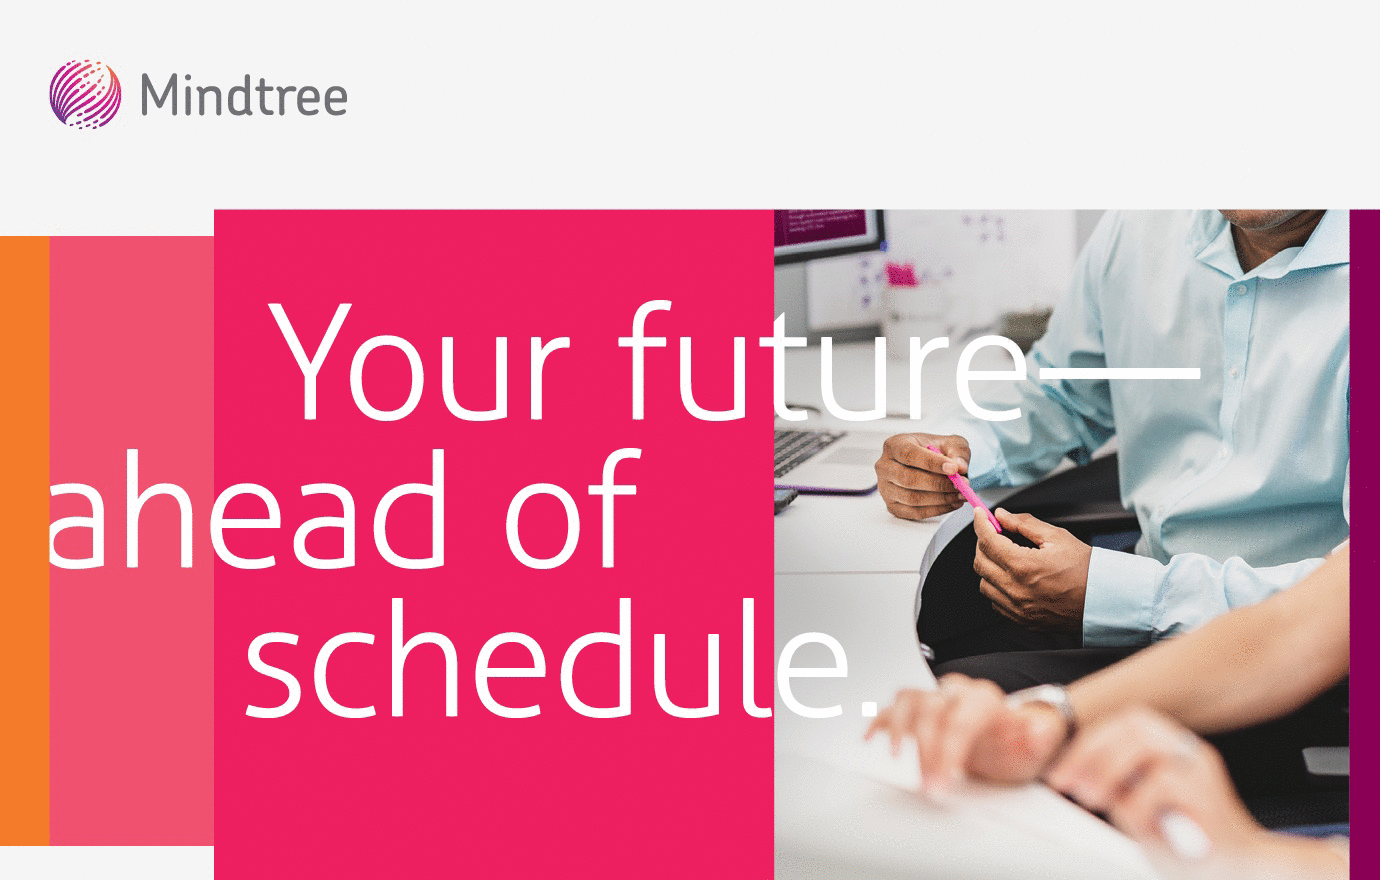 Mindtree image brochure cover with the headline "Your future—ahead of schedule"